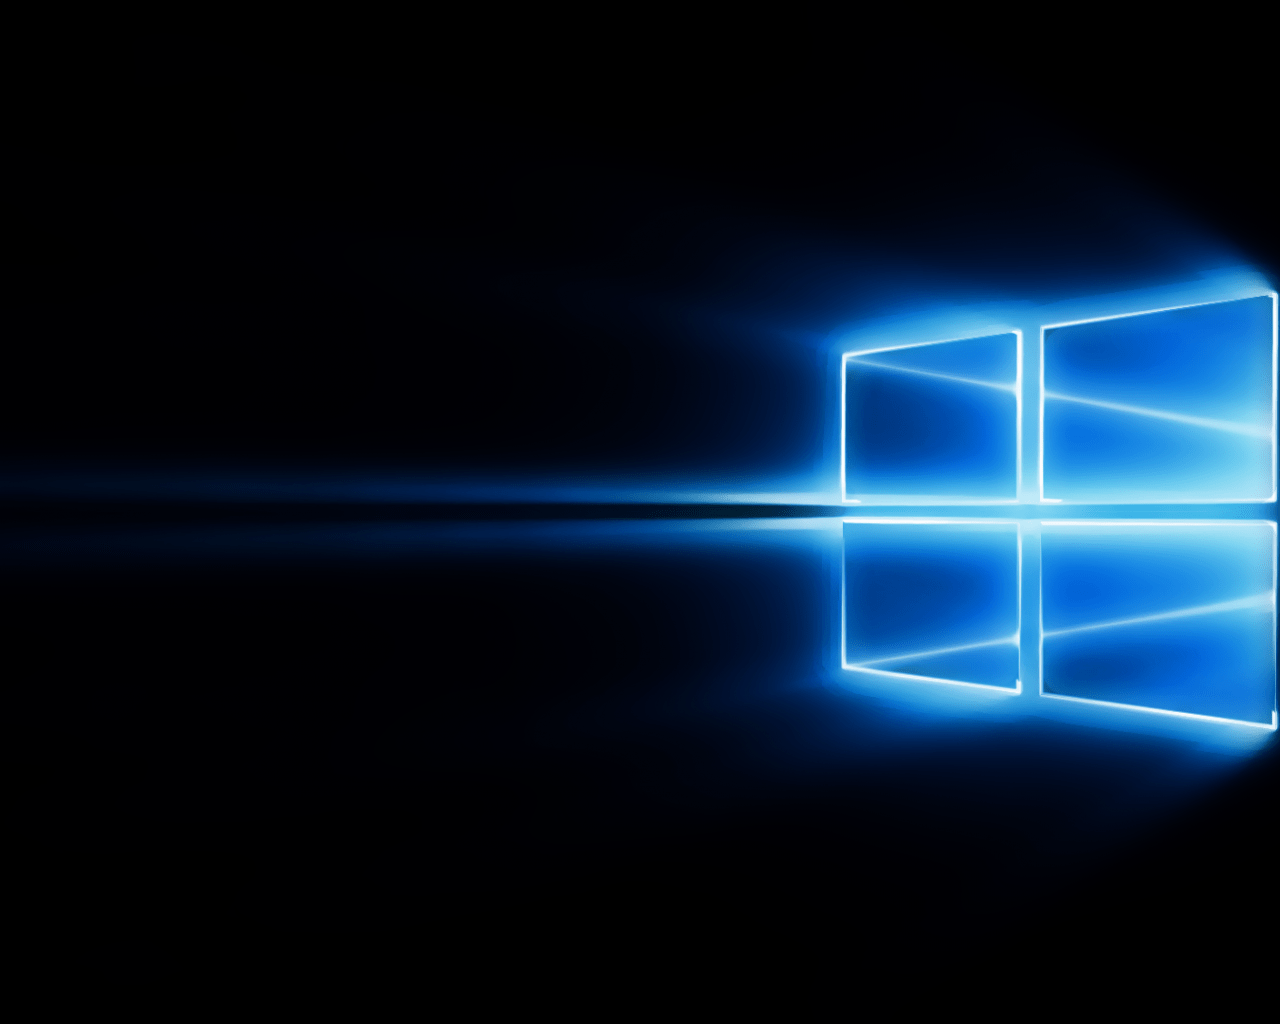 Windows 10 Pro Wallpapers - Top Free Windows 10 Pro Backgrounds